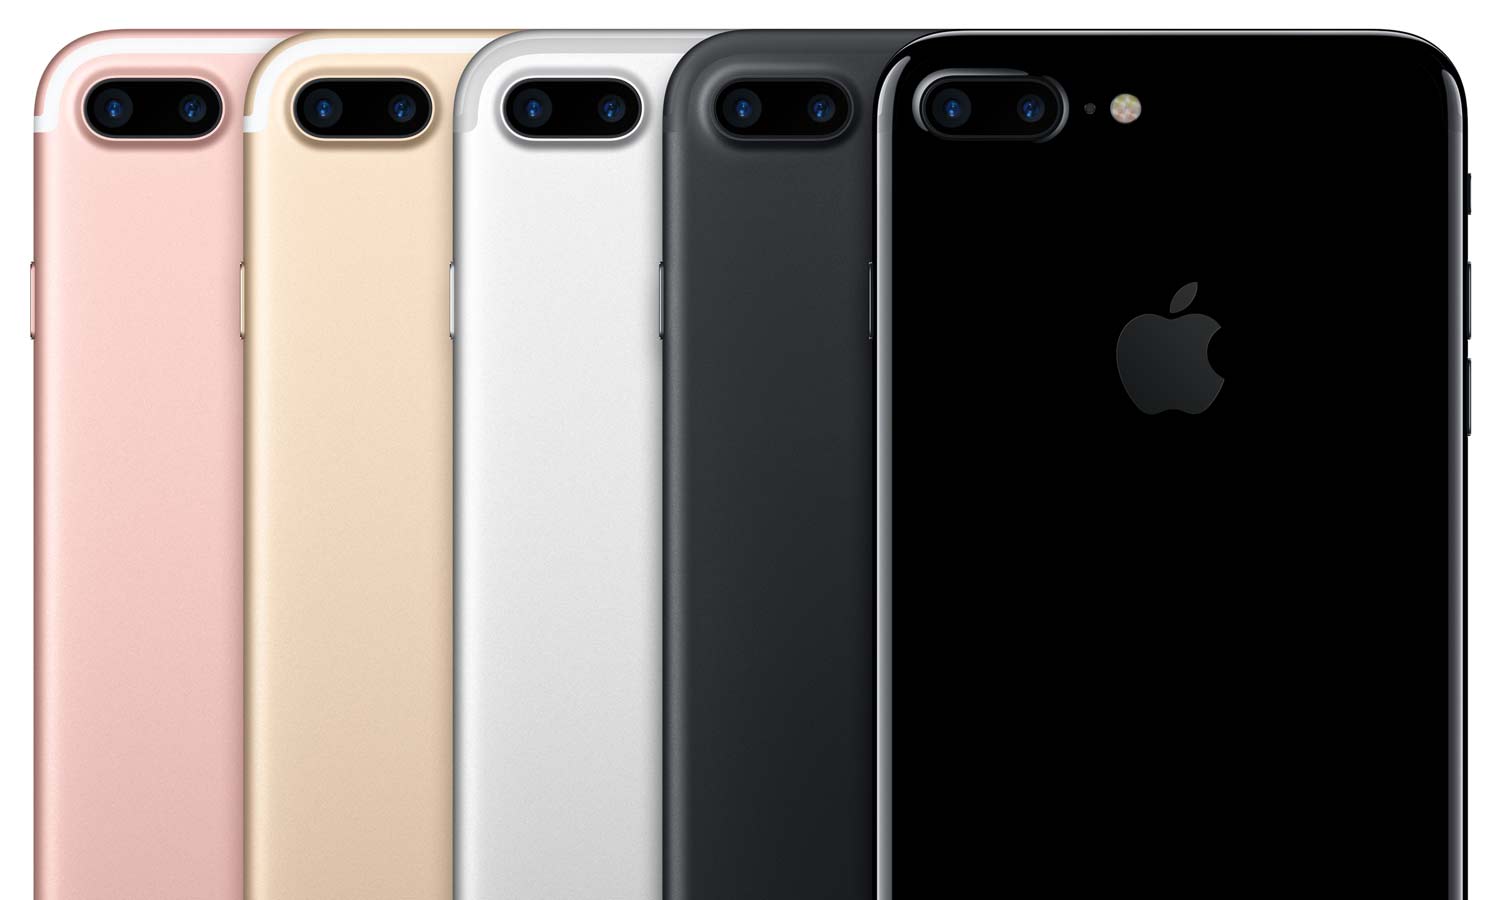 iPhone 7, 7 Plus vs iPhone 6s, Plus: What Should You Buy? | Tom's Guide